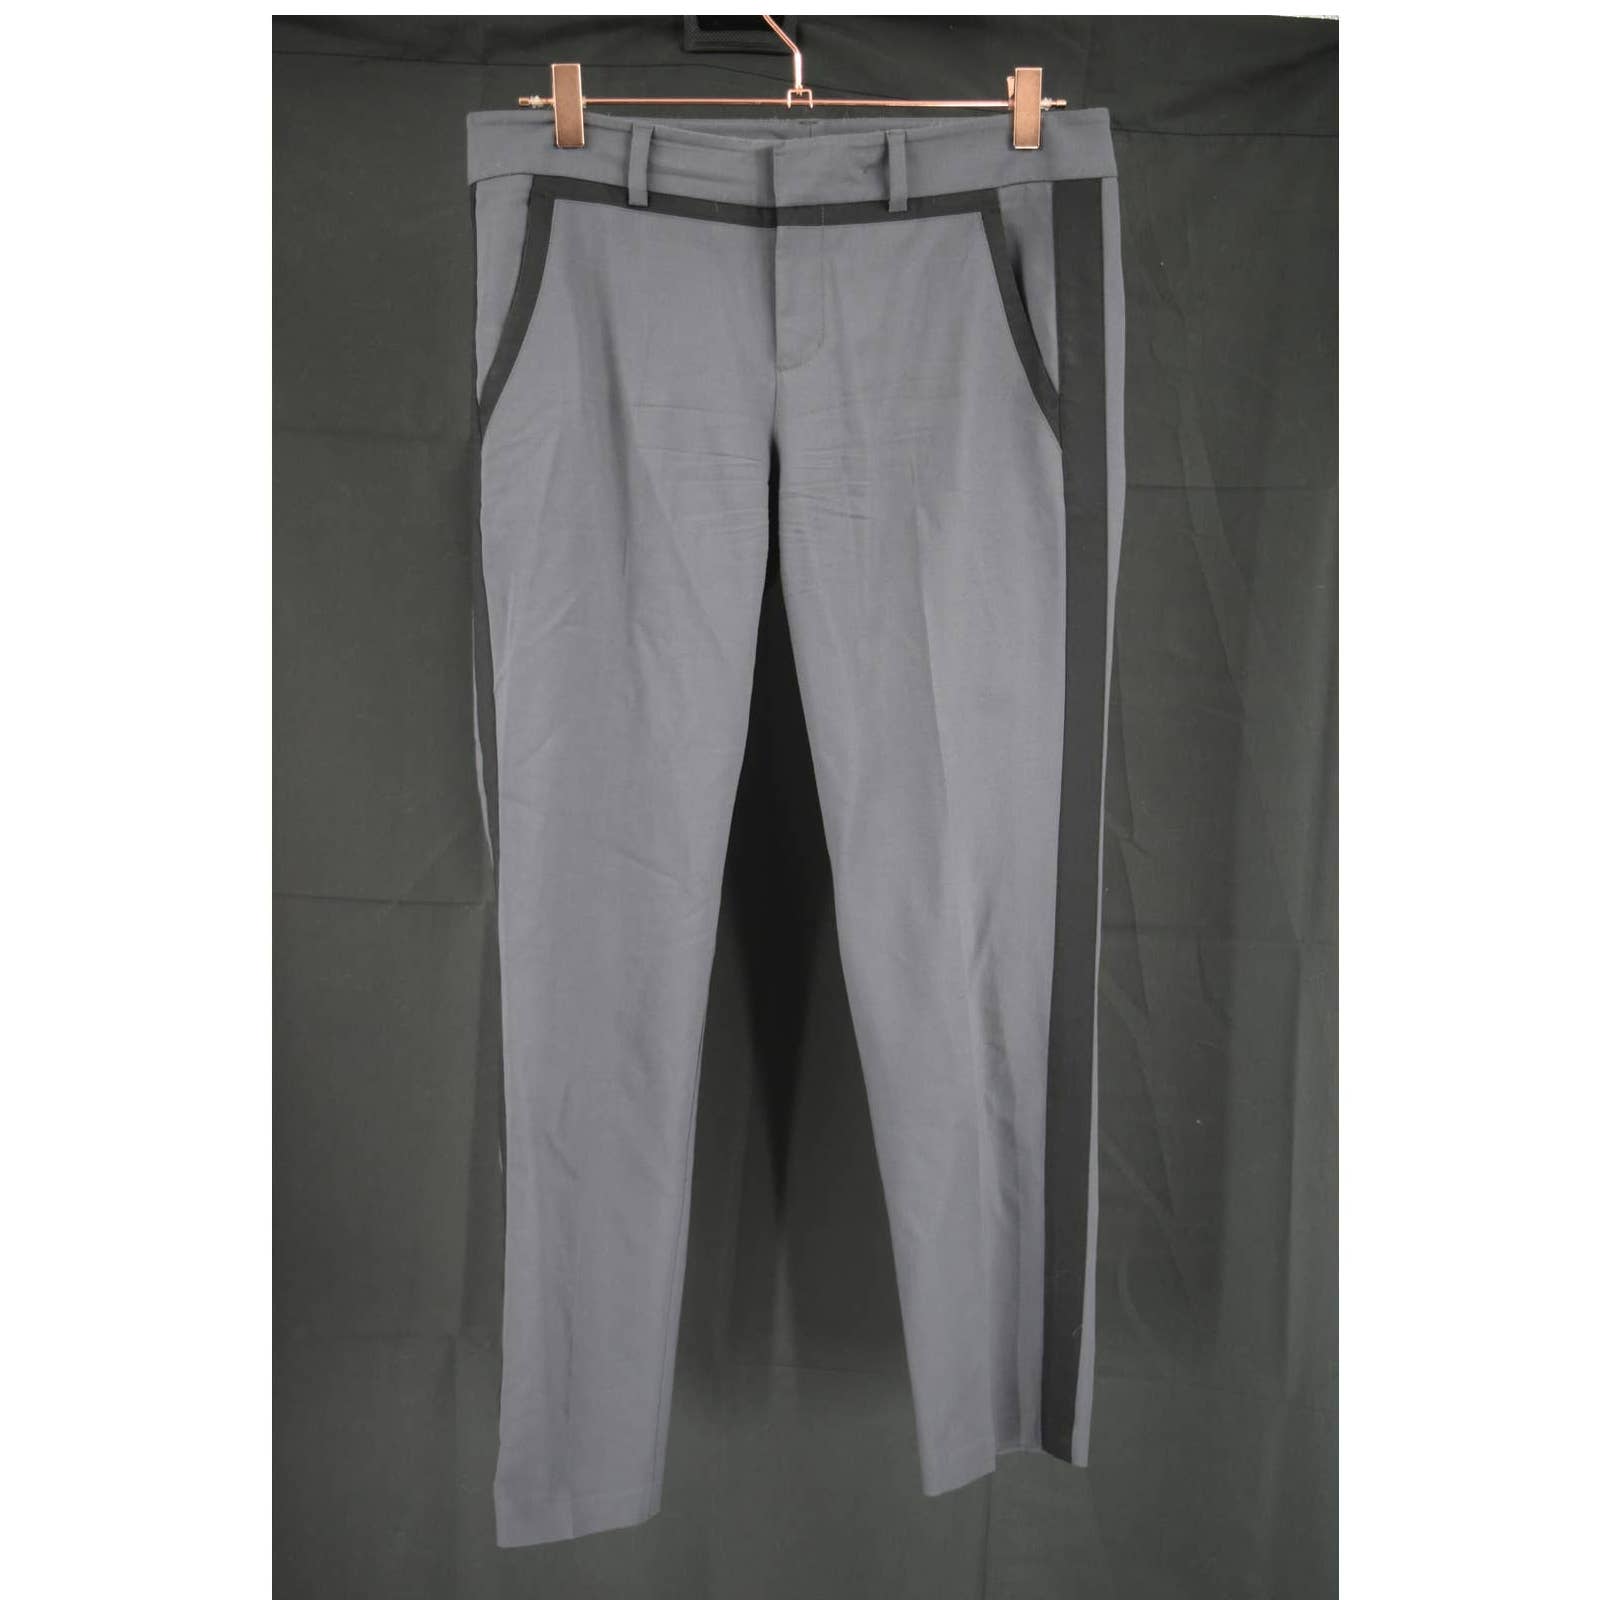 Vince Grey and Black Flat Front Pants - 6